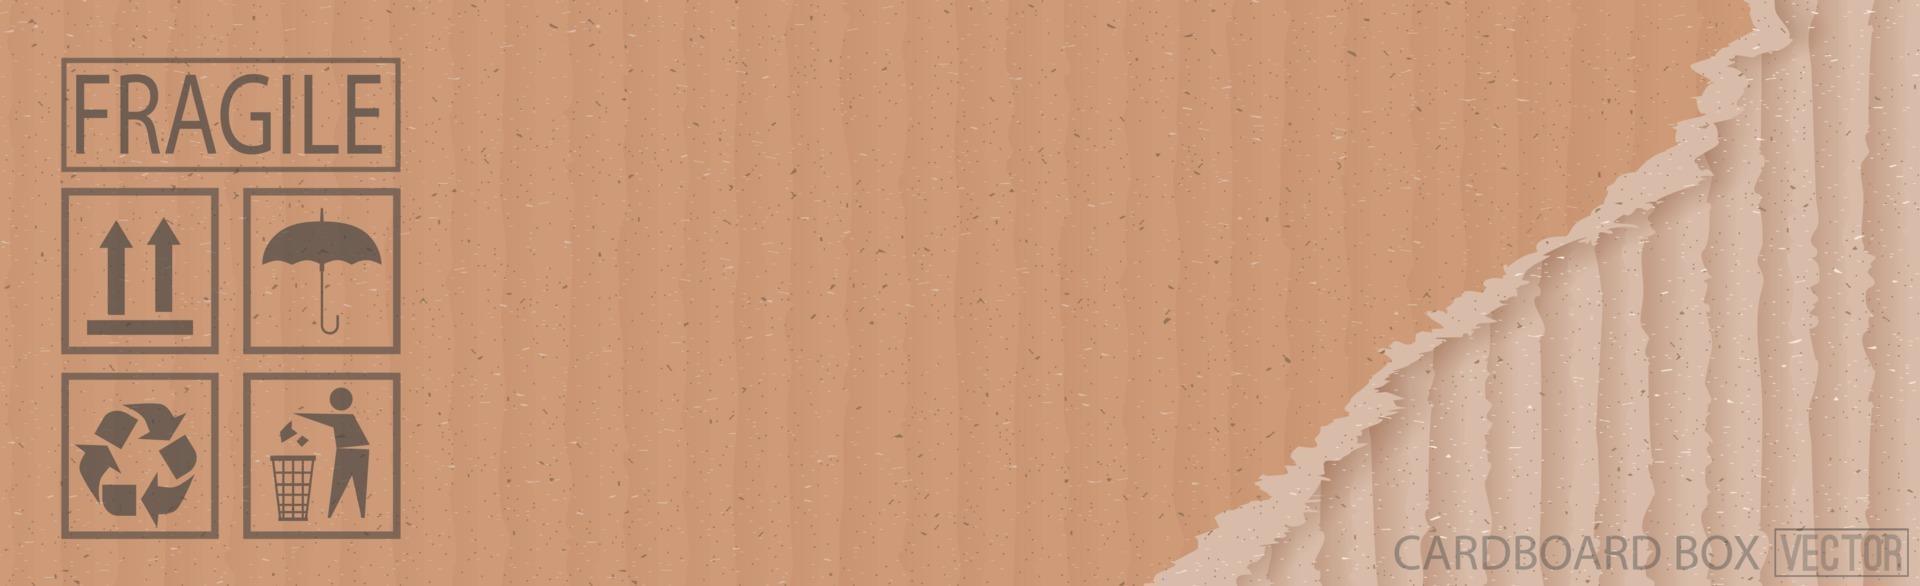 Realistic texture of natural yellow - gray cardboard vector